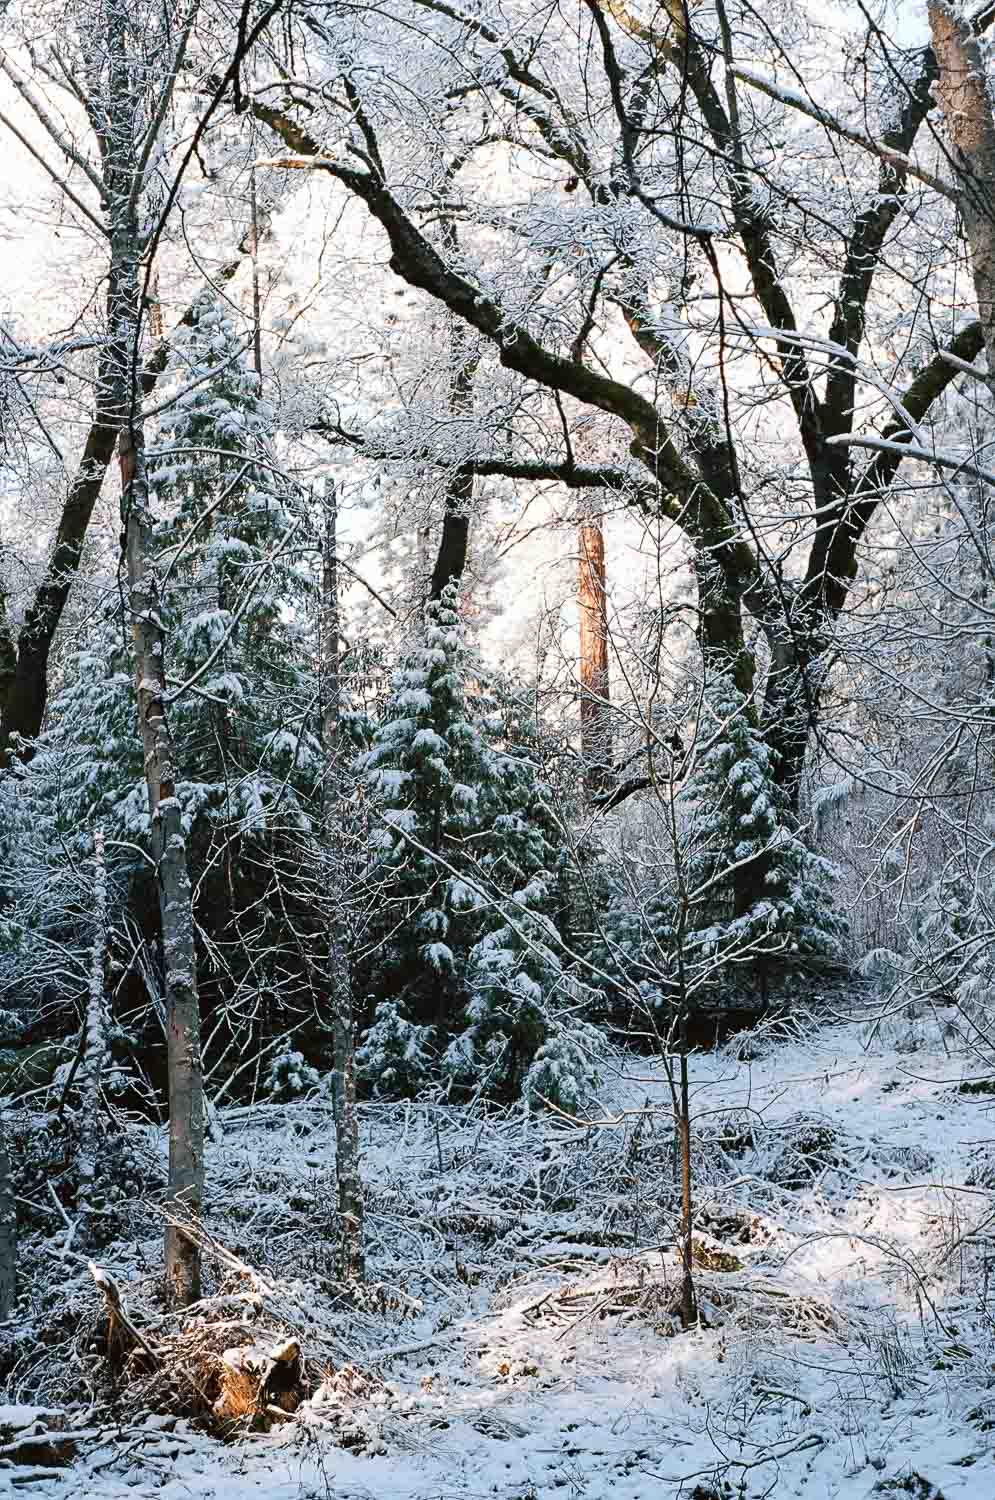 A tranquil winter forest scene with snow-covered trees and sunlight filtering through the branches.